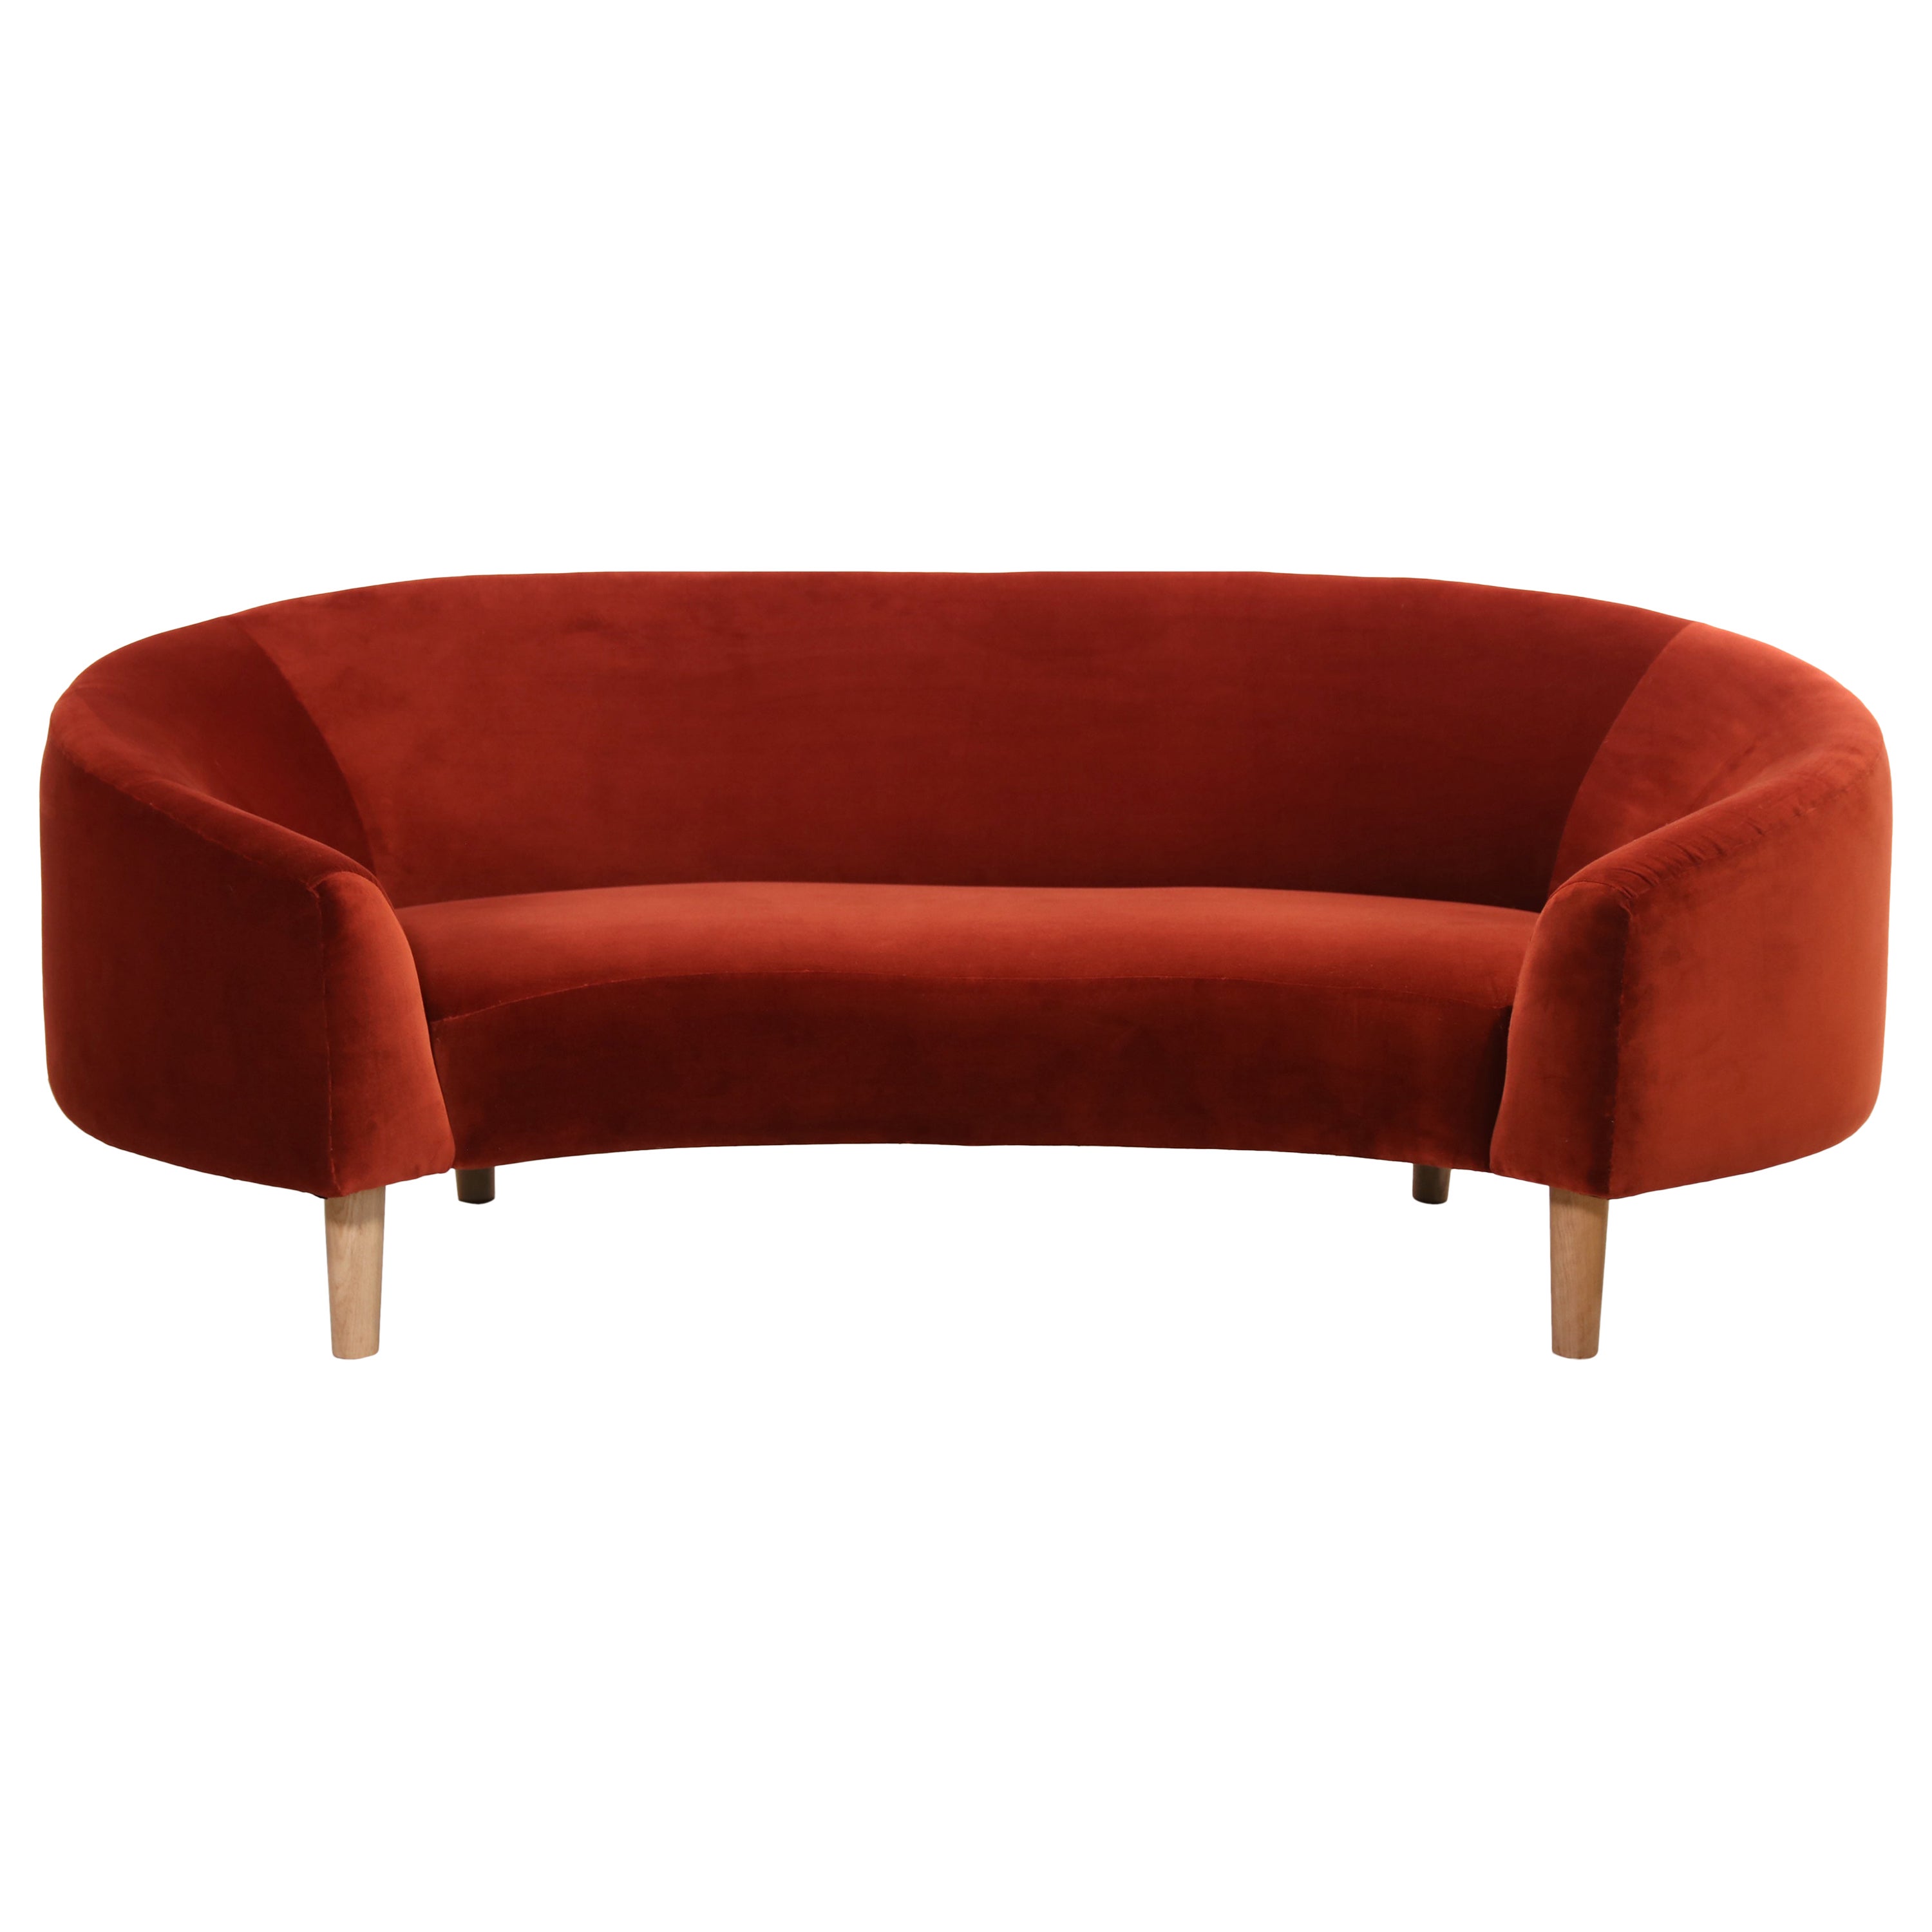 Mid century curved sofa in red velvet and oak For Sale